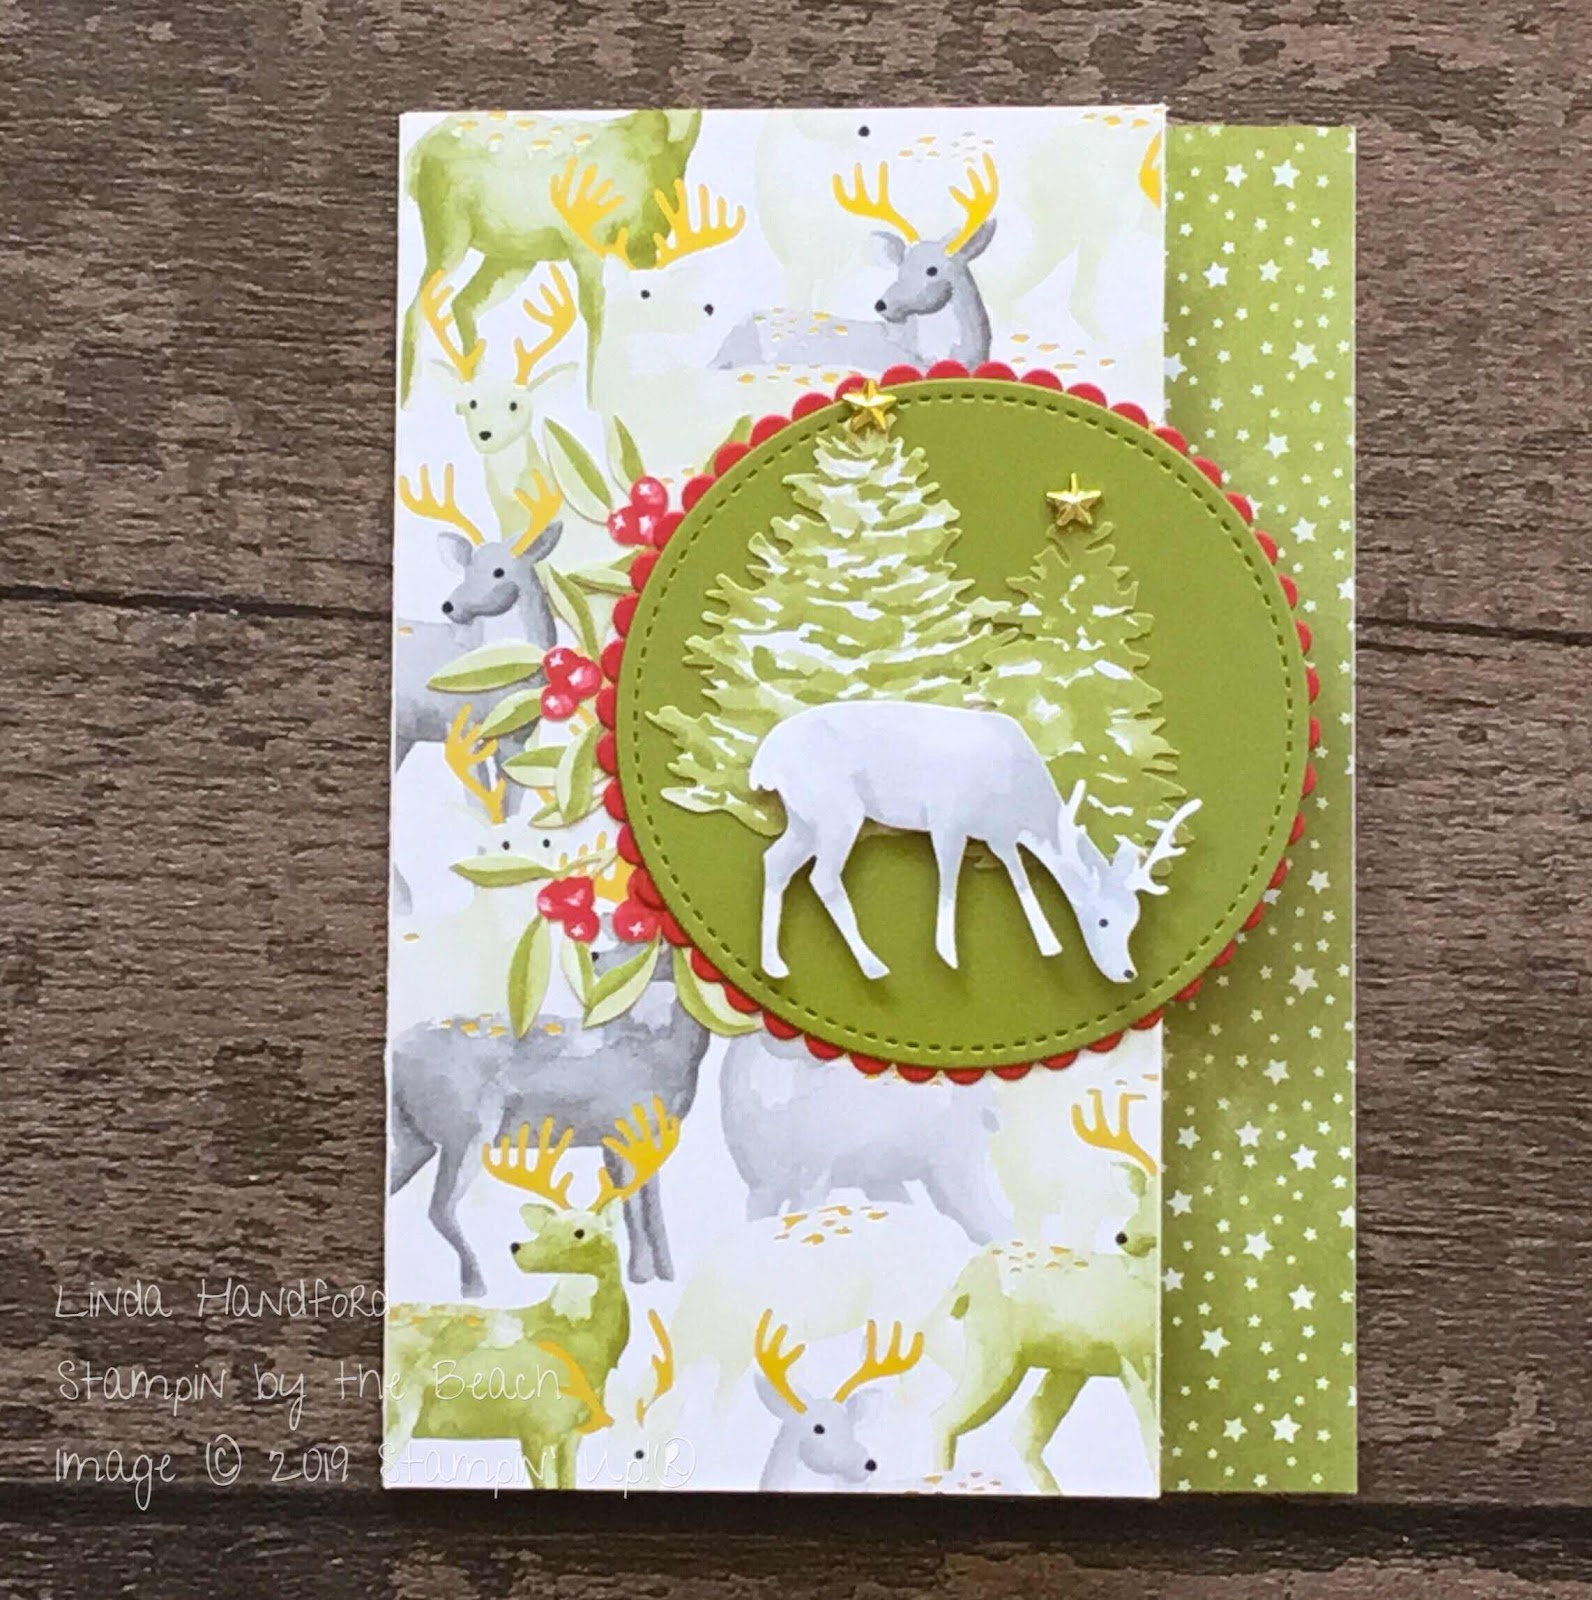 Stampin by the beach: Let's Get Hopping - Casing the Catalogue